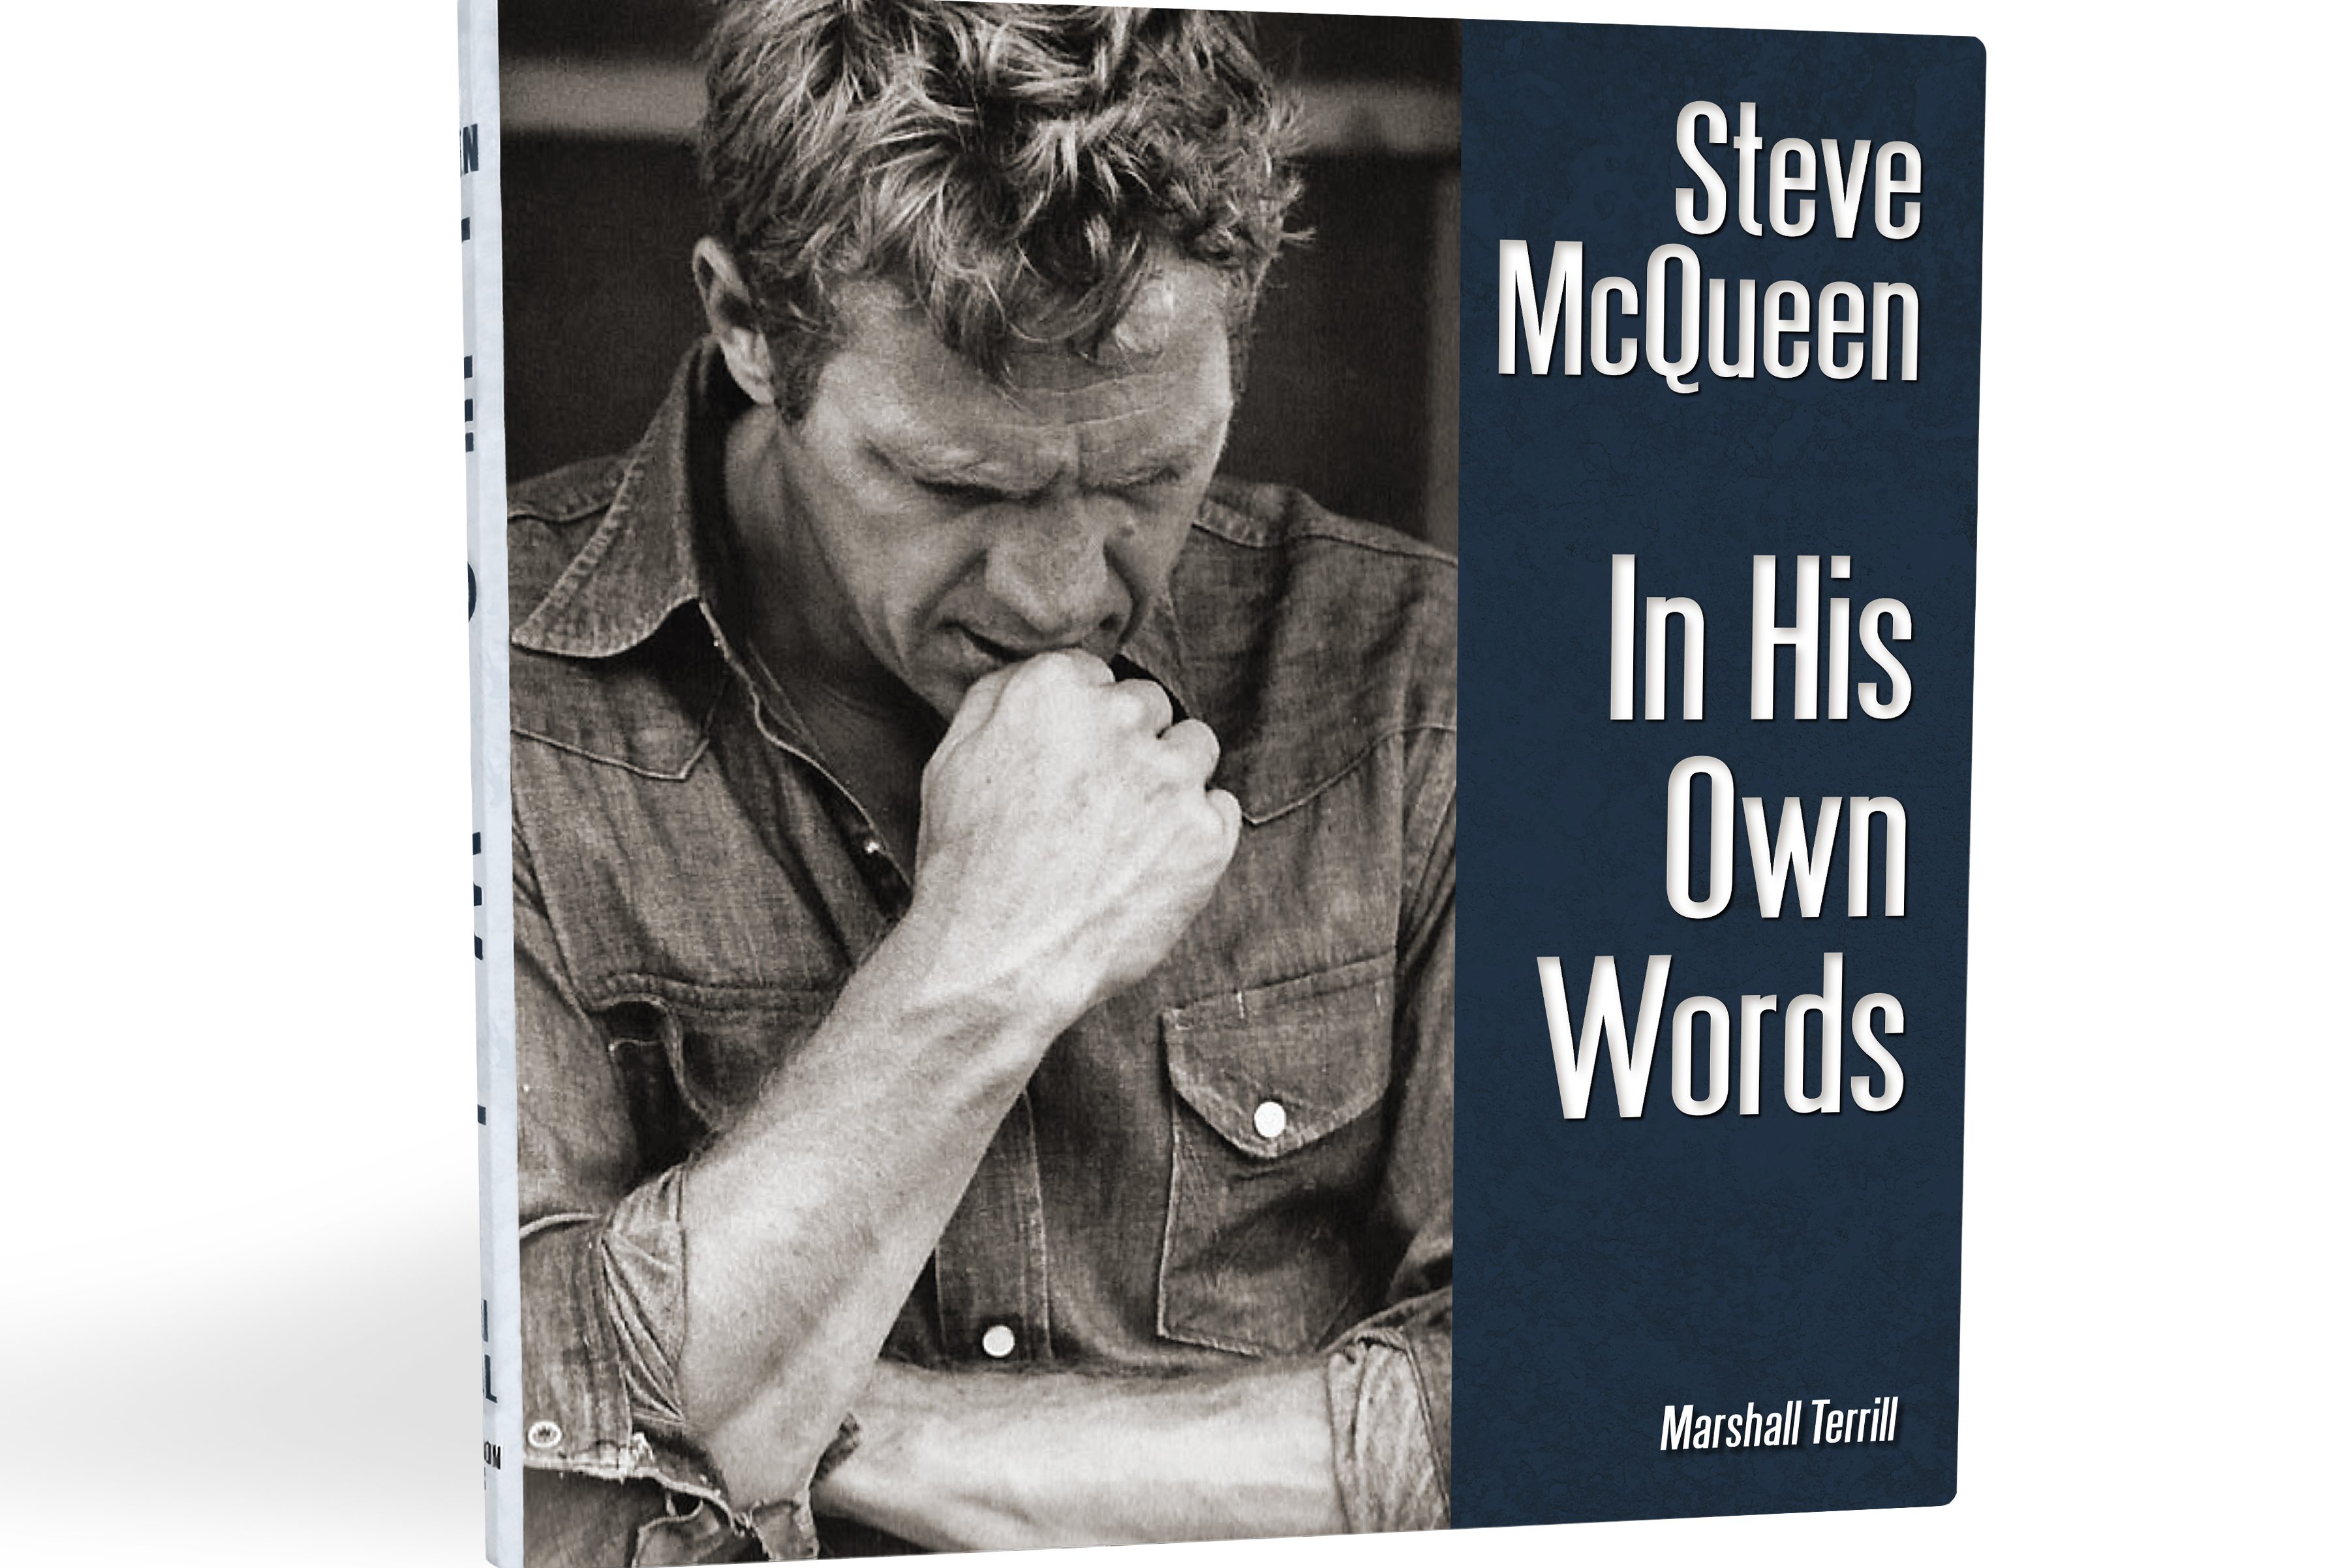 The cover of "Steve McQueen: In His Own Words" by Marshall Terrill.